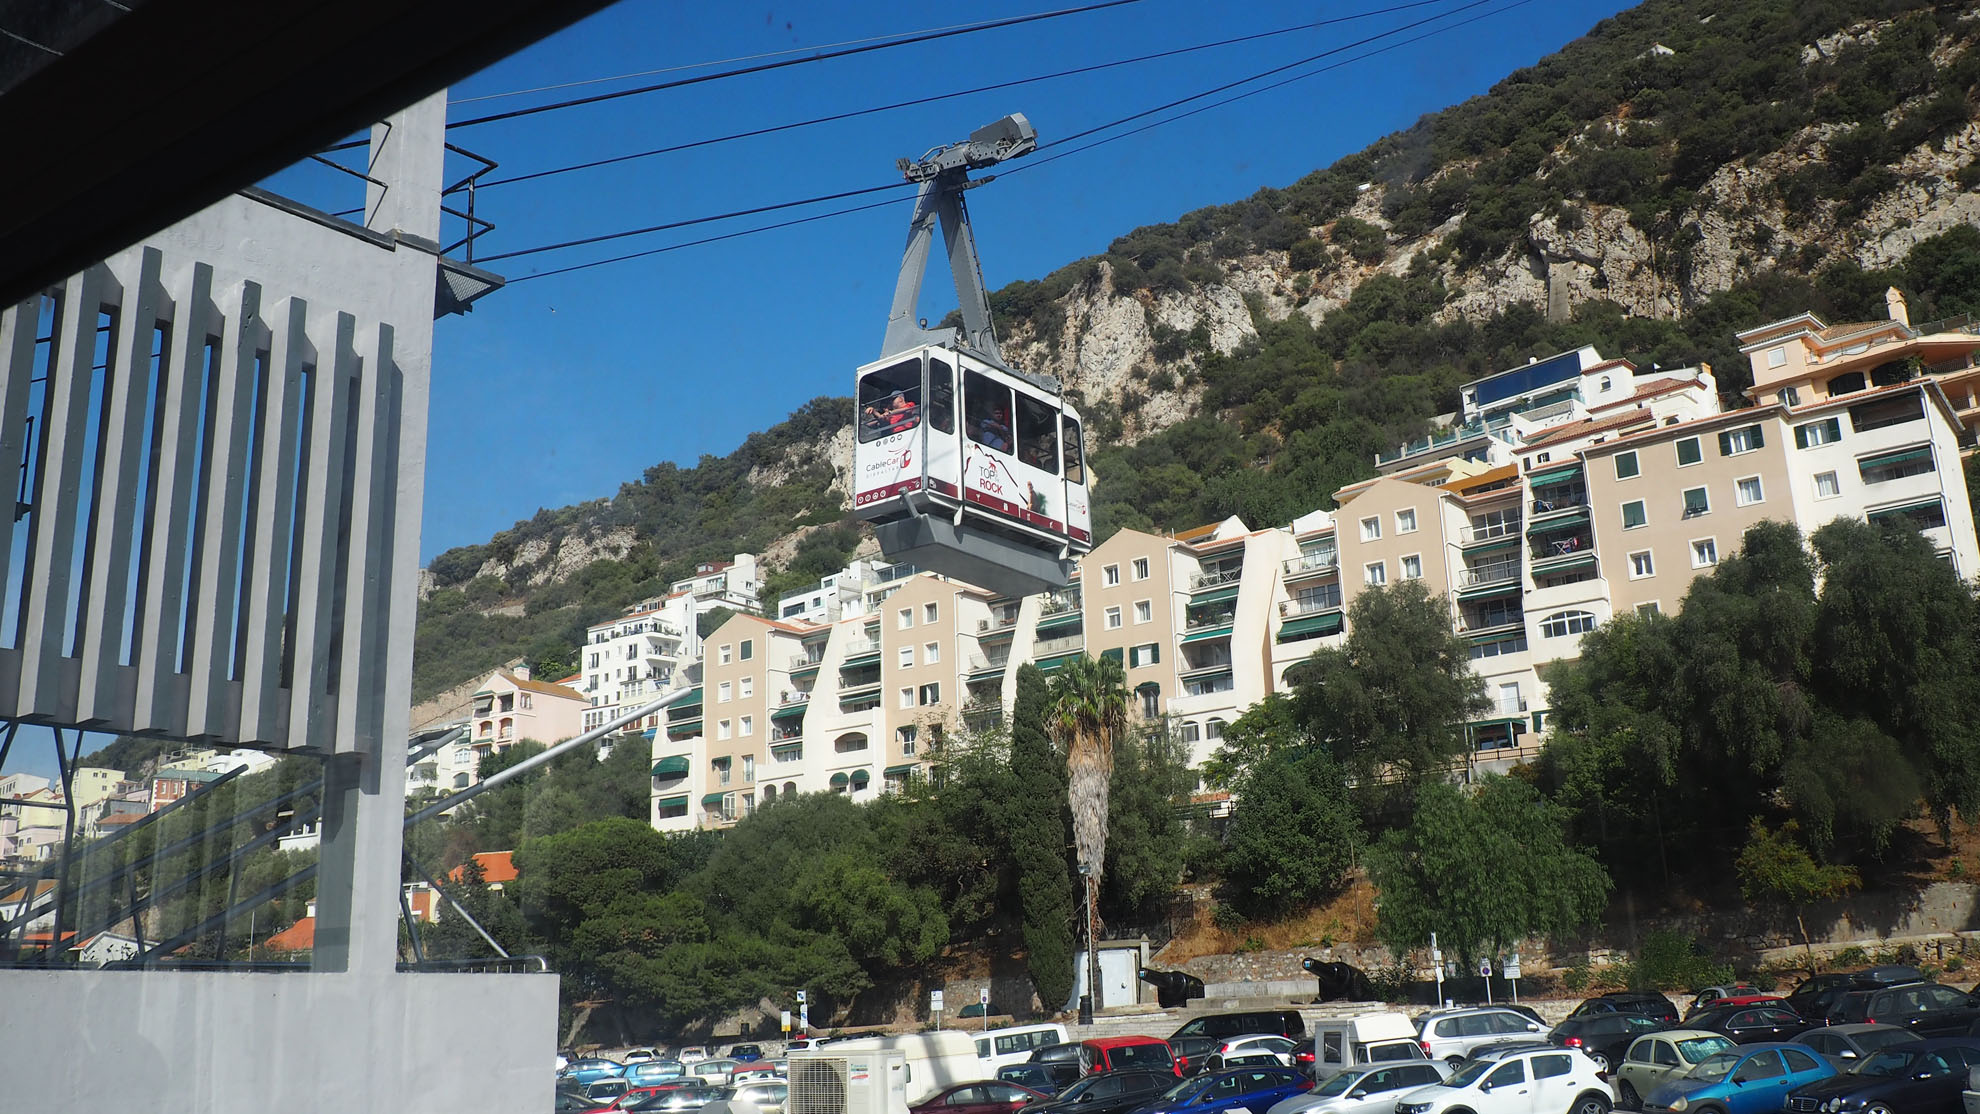 A visit and sights on the Rock of Gibraltar